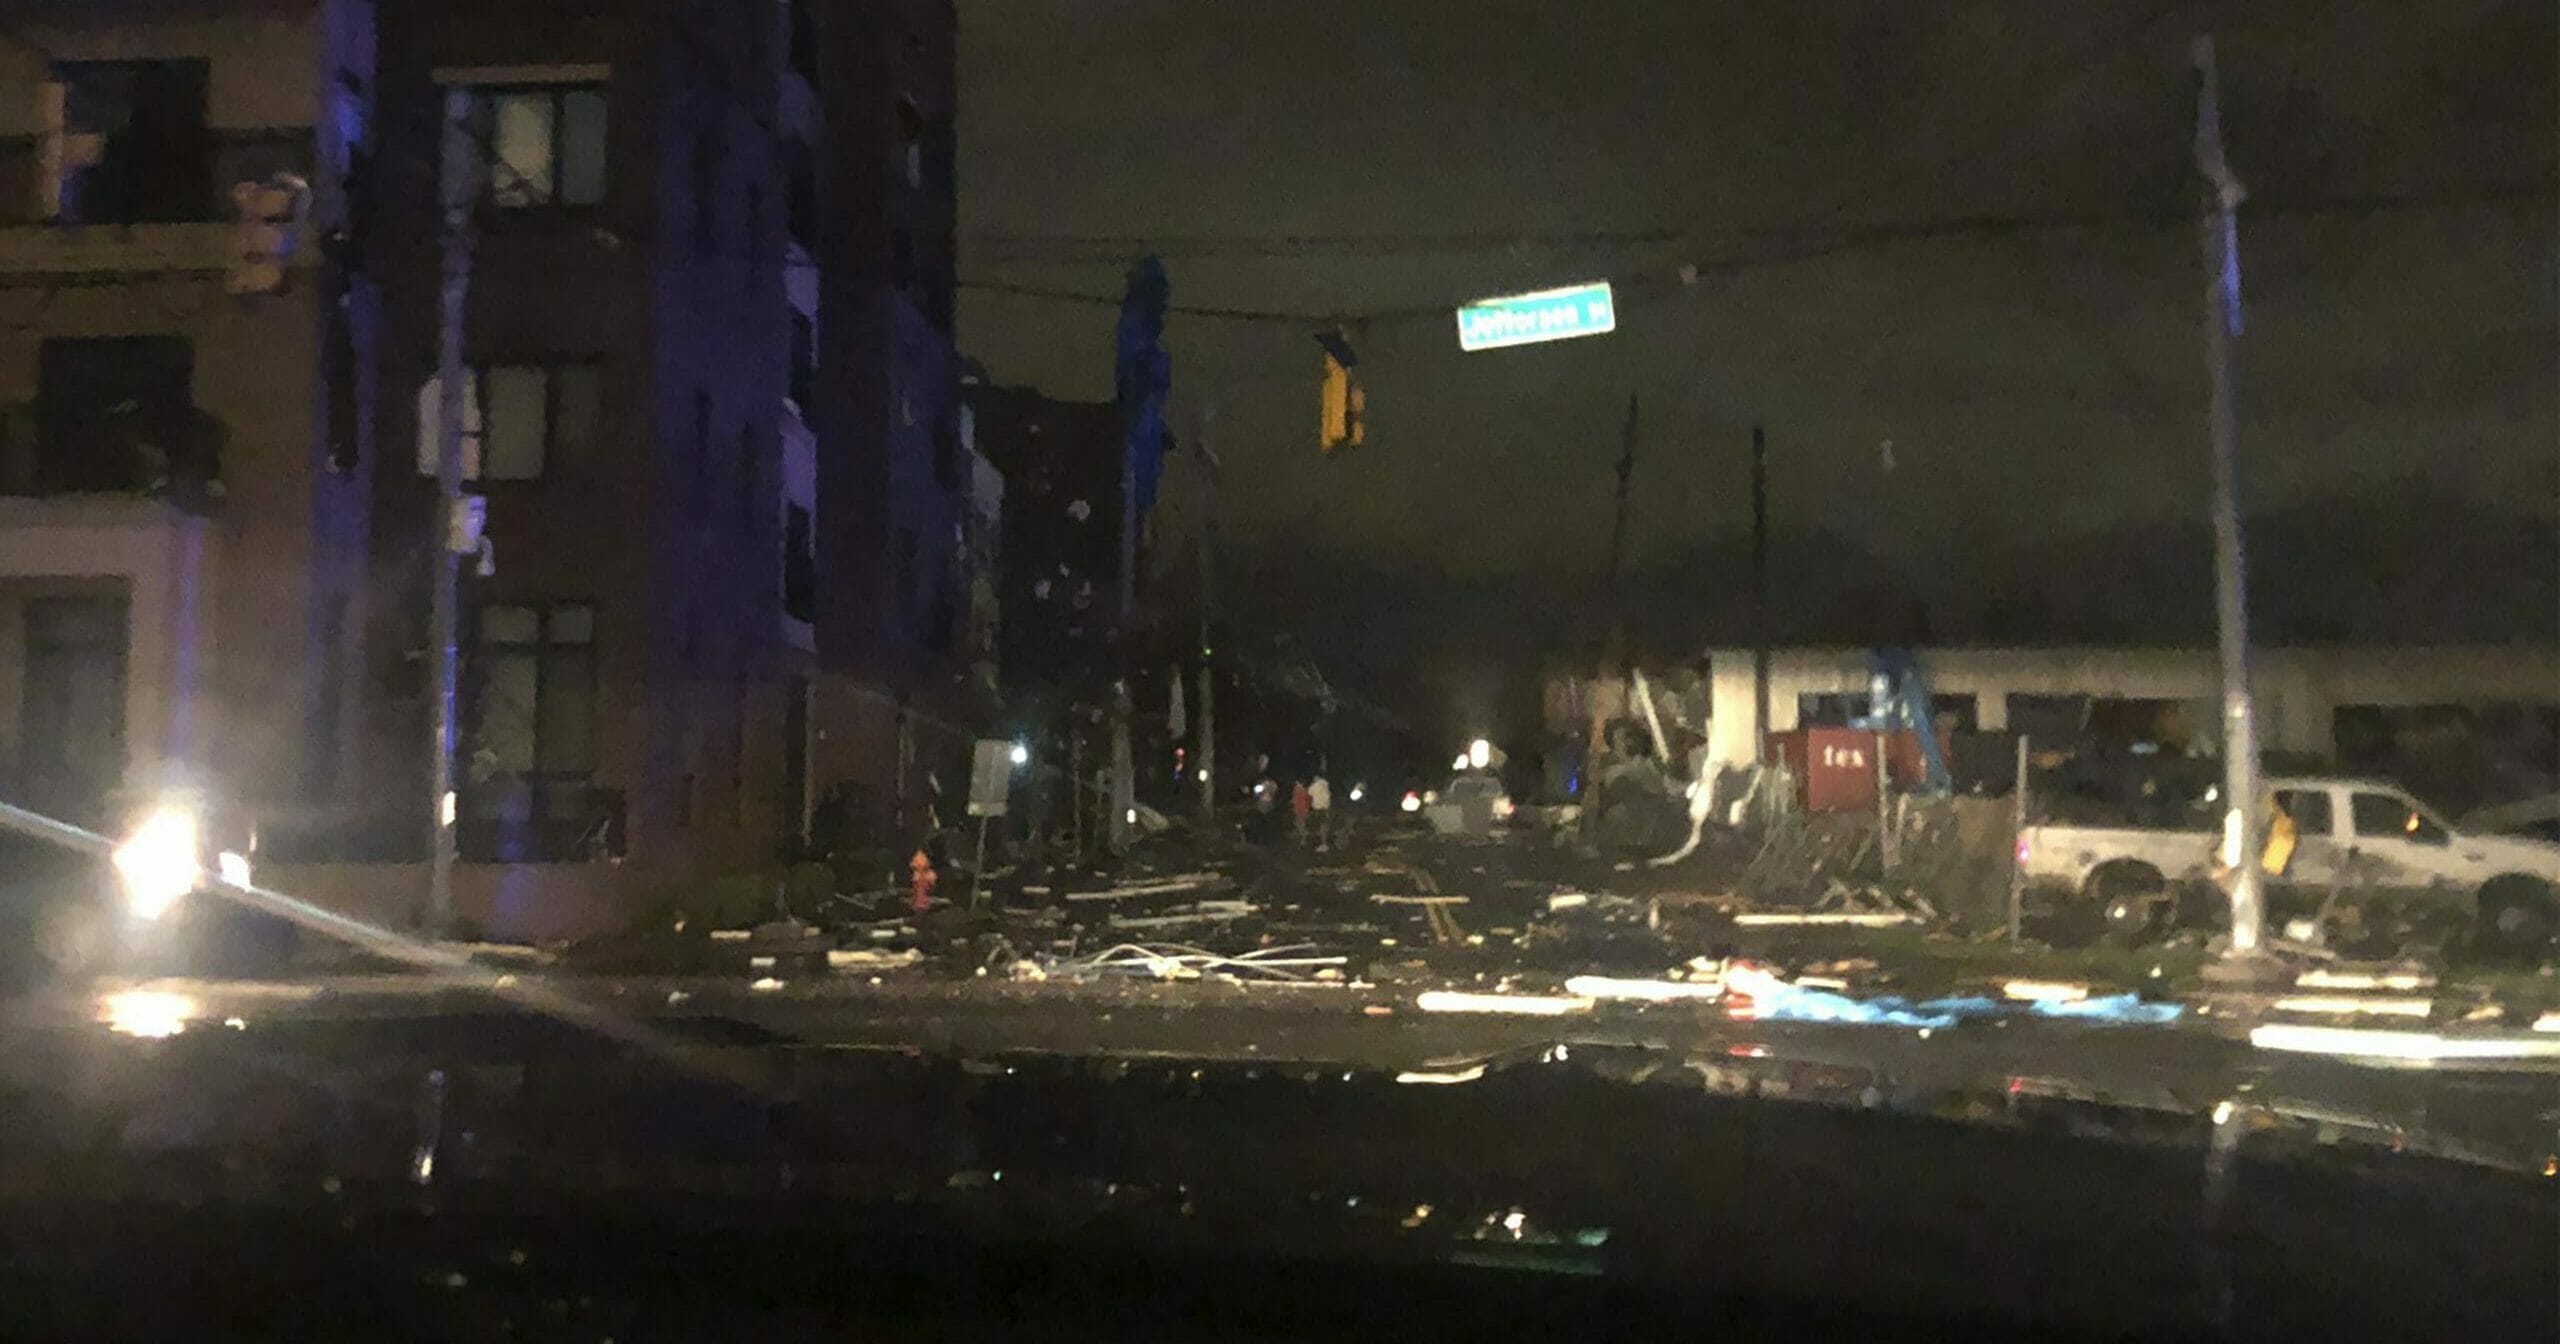 Debris is scattered across an intersection after a tornado touched down in downtown Nashville, Tennessee, March 3, 2020.